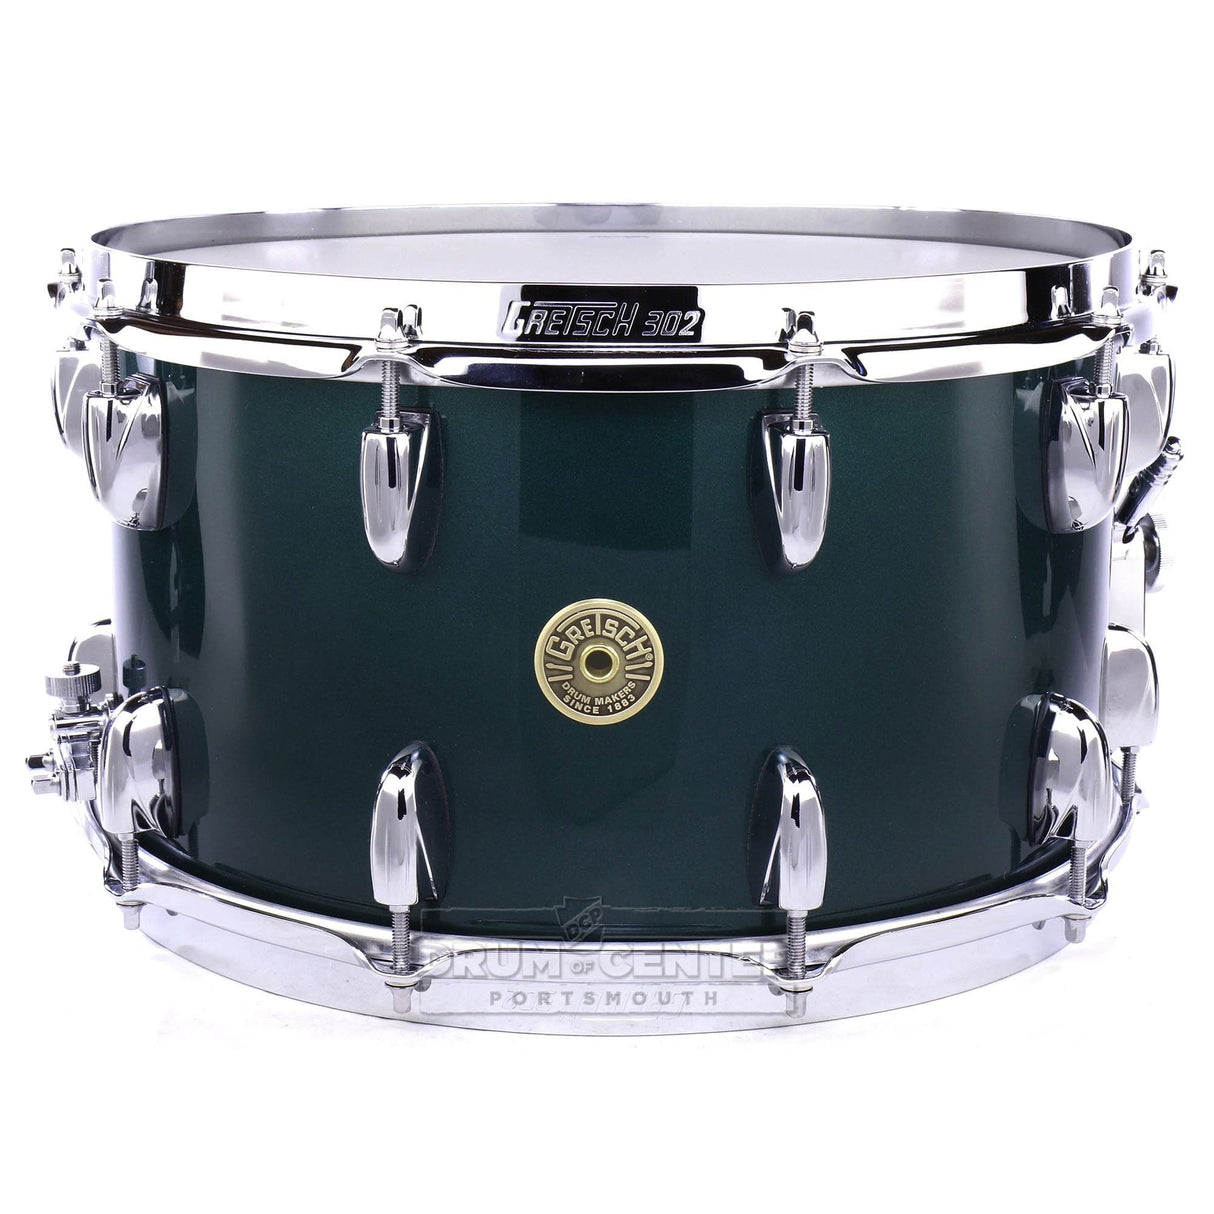 Gretsch Broadkaster Snare Drum 14x8 20-Lug Cadillac Green Gloss w/Micro-Sensitive Strainer